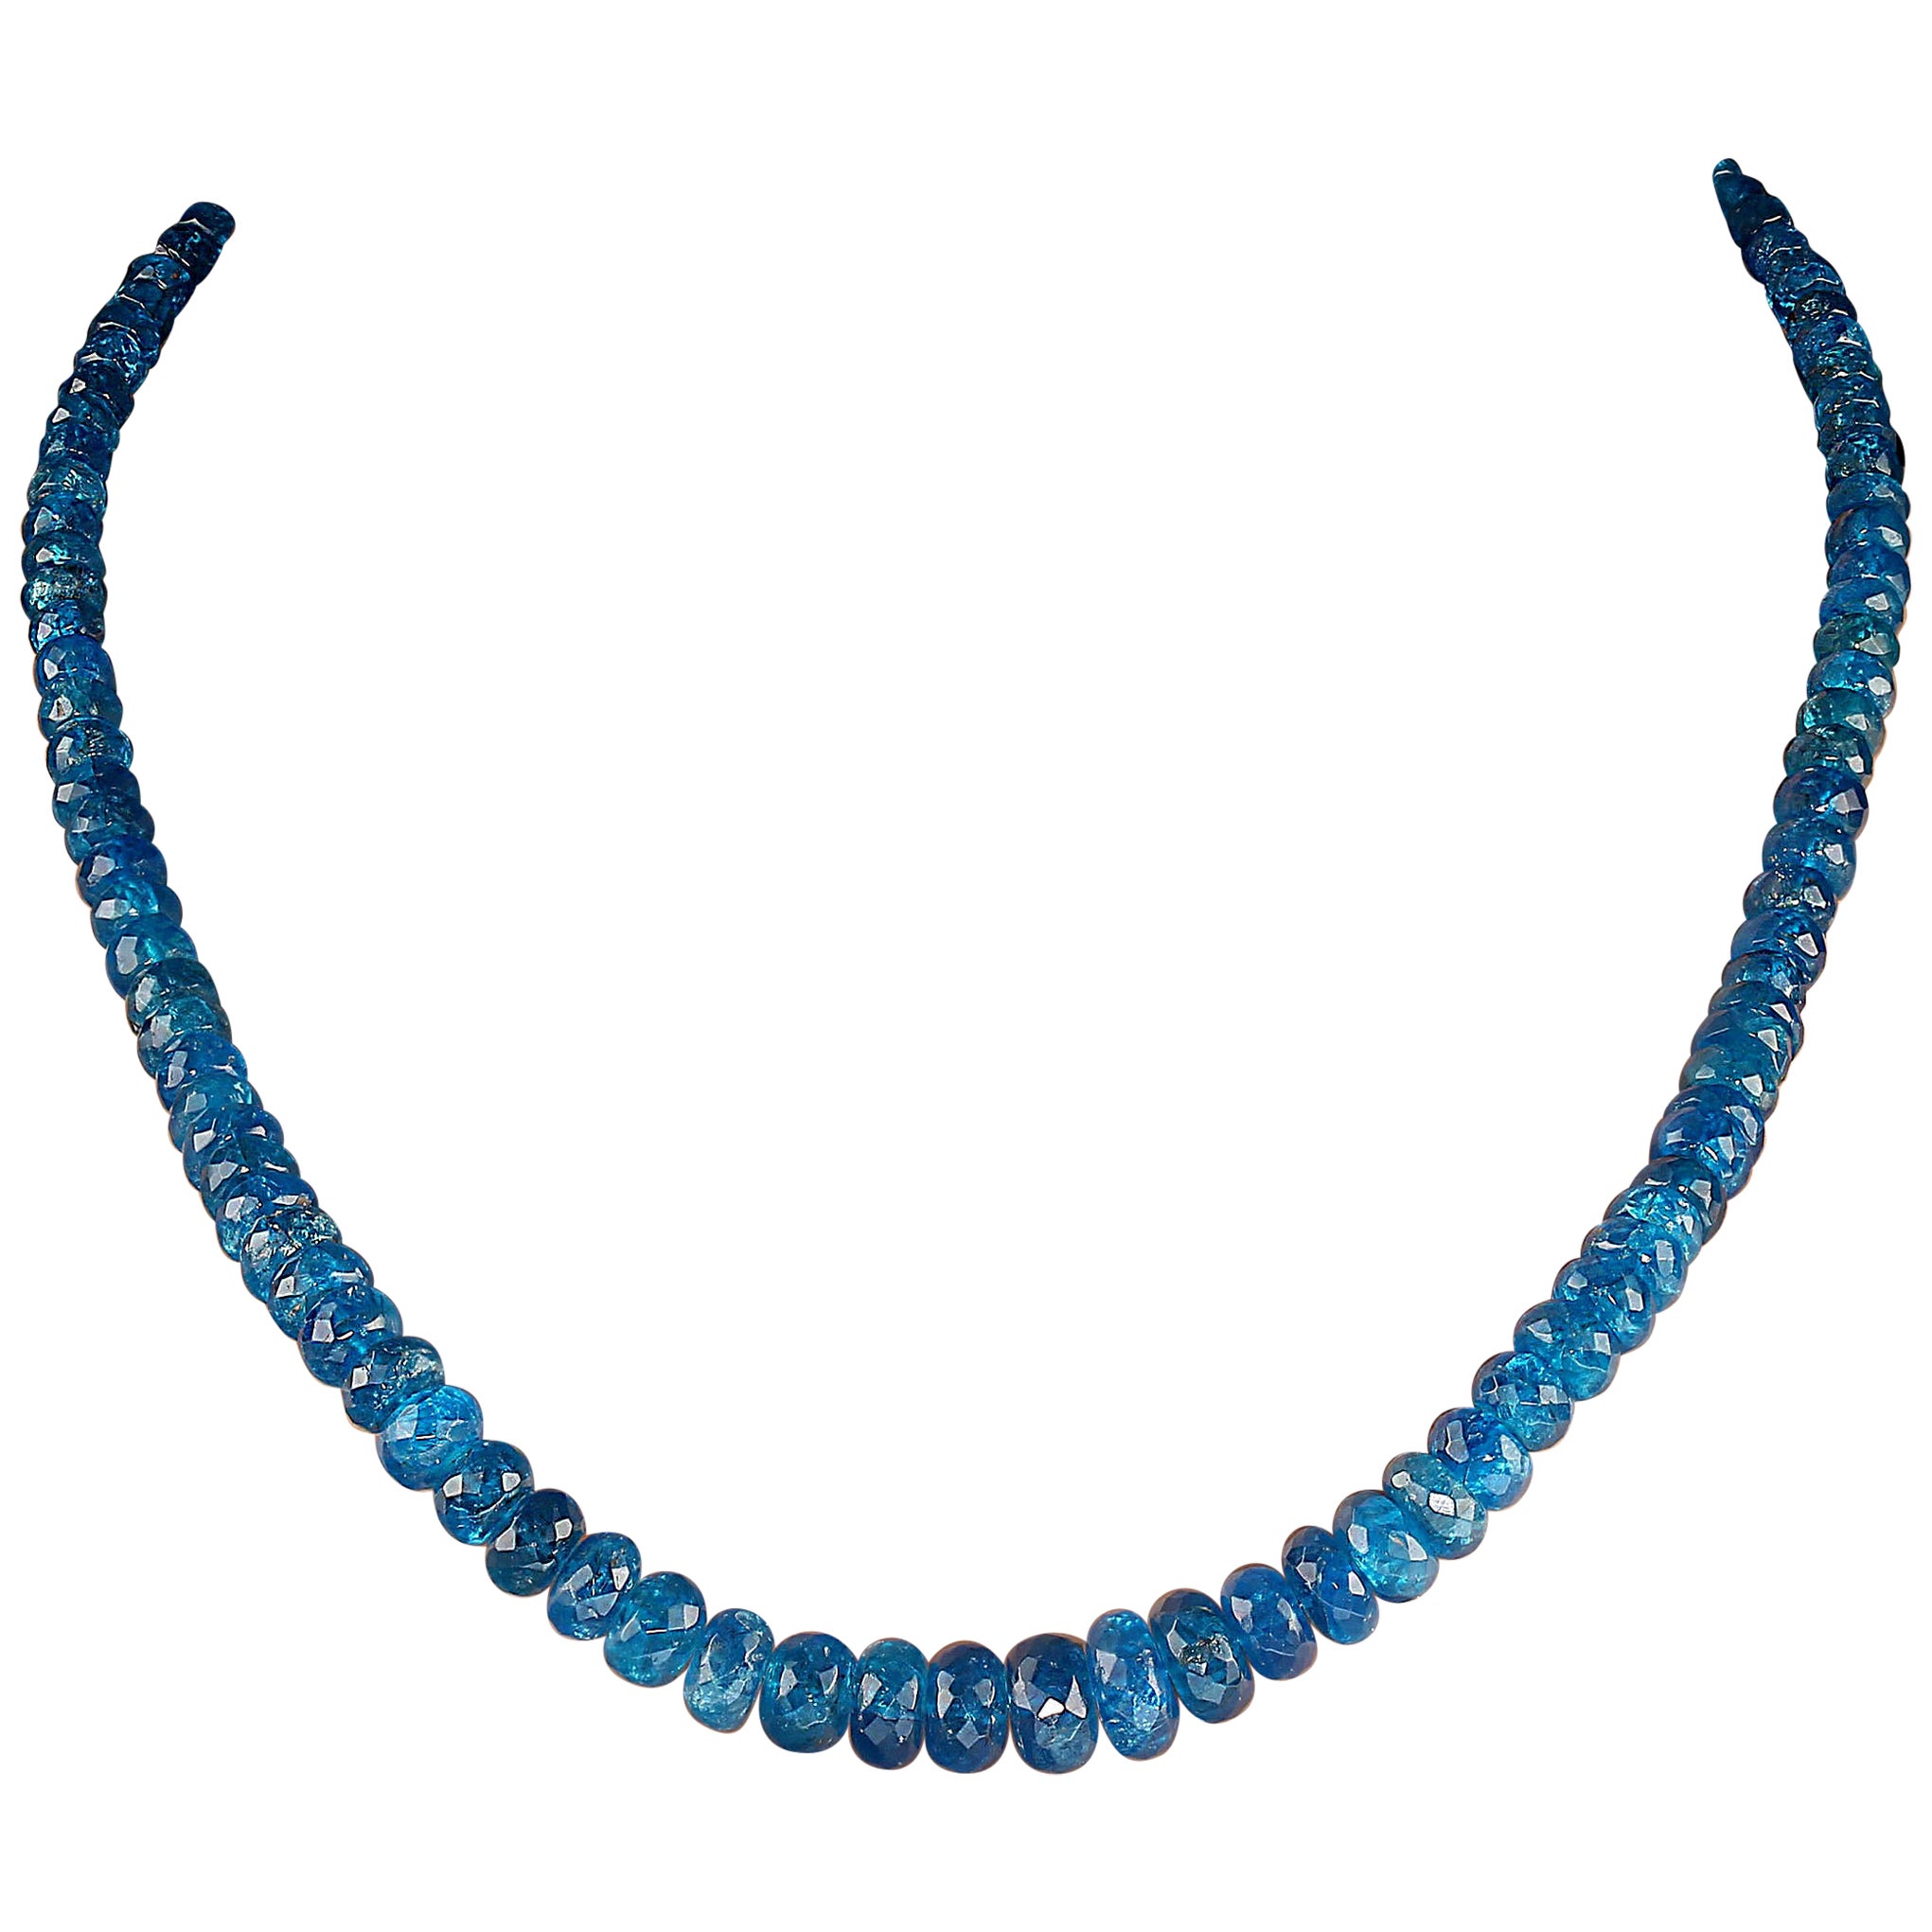 19-Inch neon apatite necklace of graduated faceted rondelles. This one-of-a-kind necklace fairly glows.  The rondelles graduate from 4 to 10 MM.  At 19 inches it sits perfectly on your neck and is lovely both day and evening.  It is secured with a